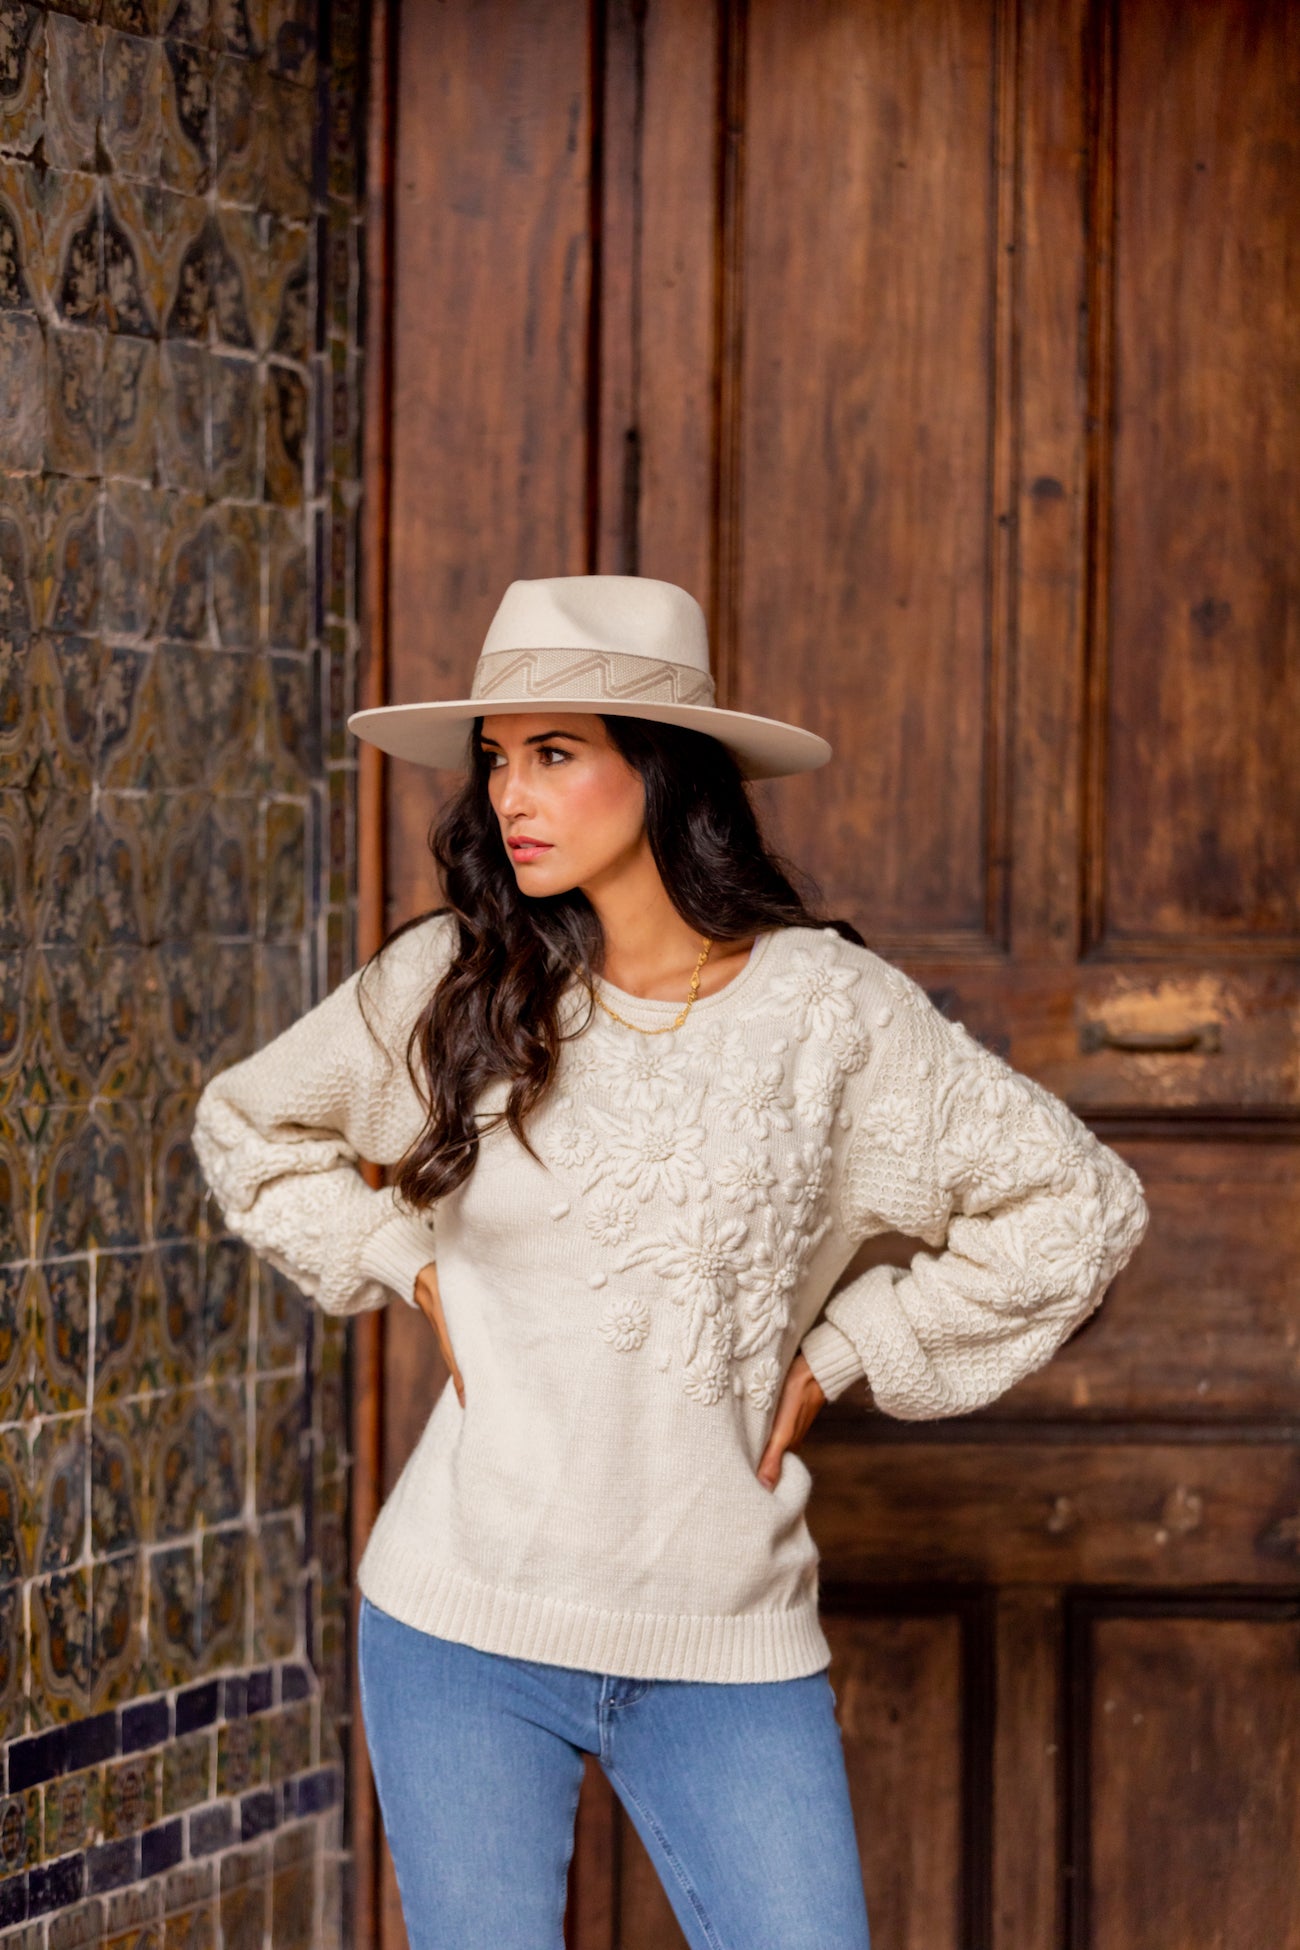 White western style chic hat